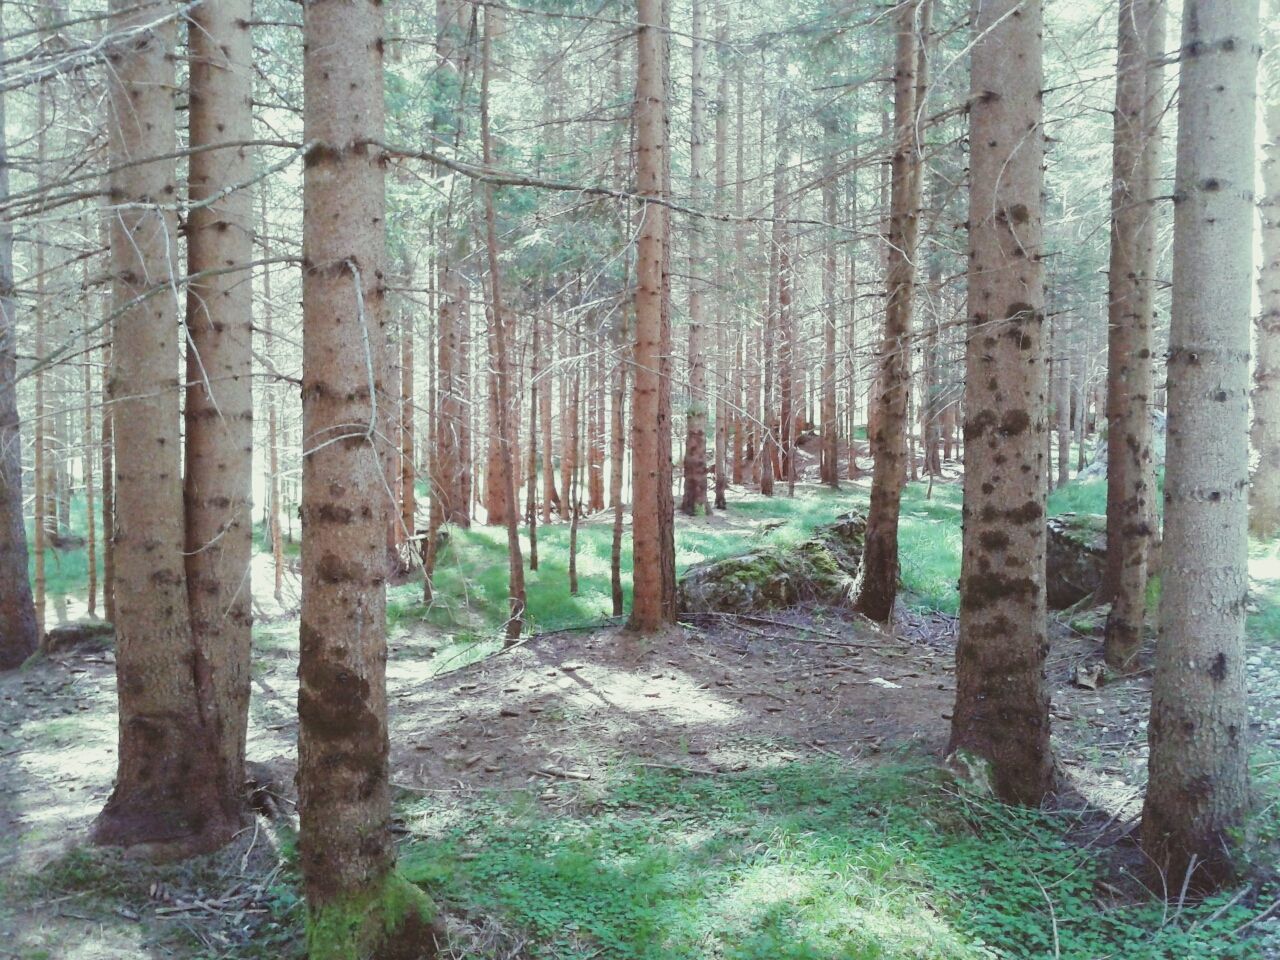 View of trees in the forest